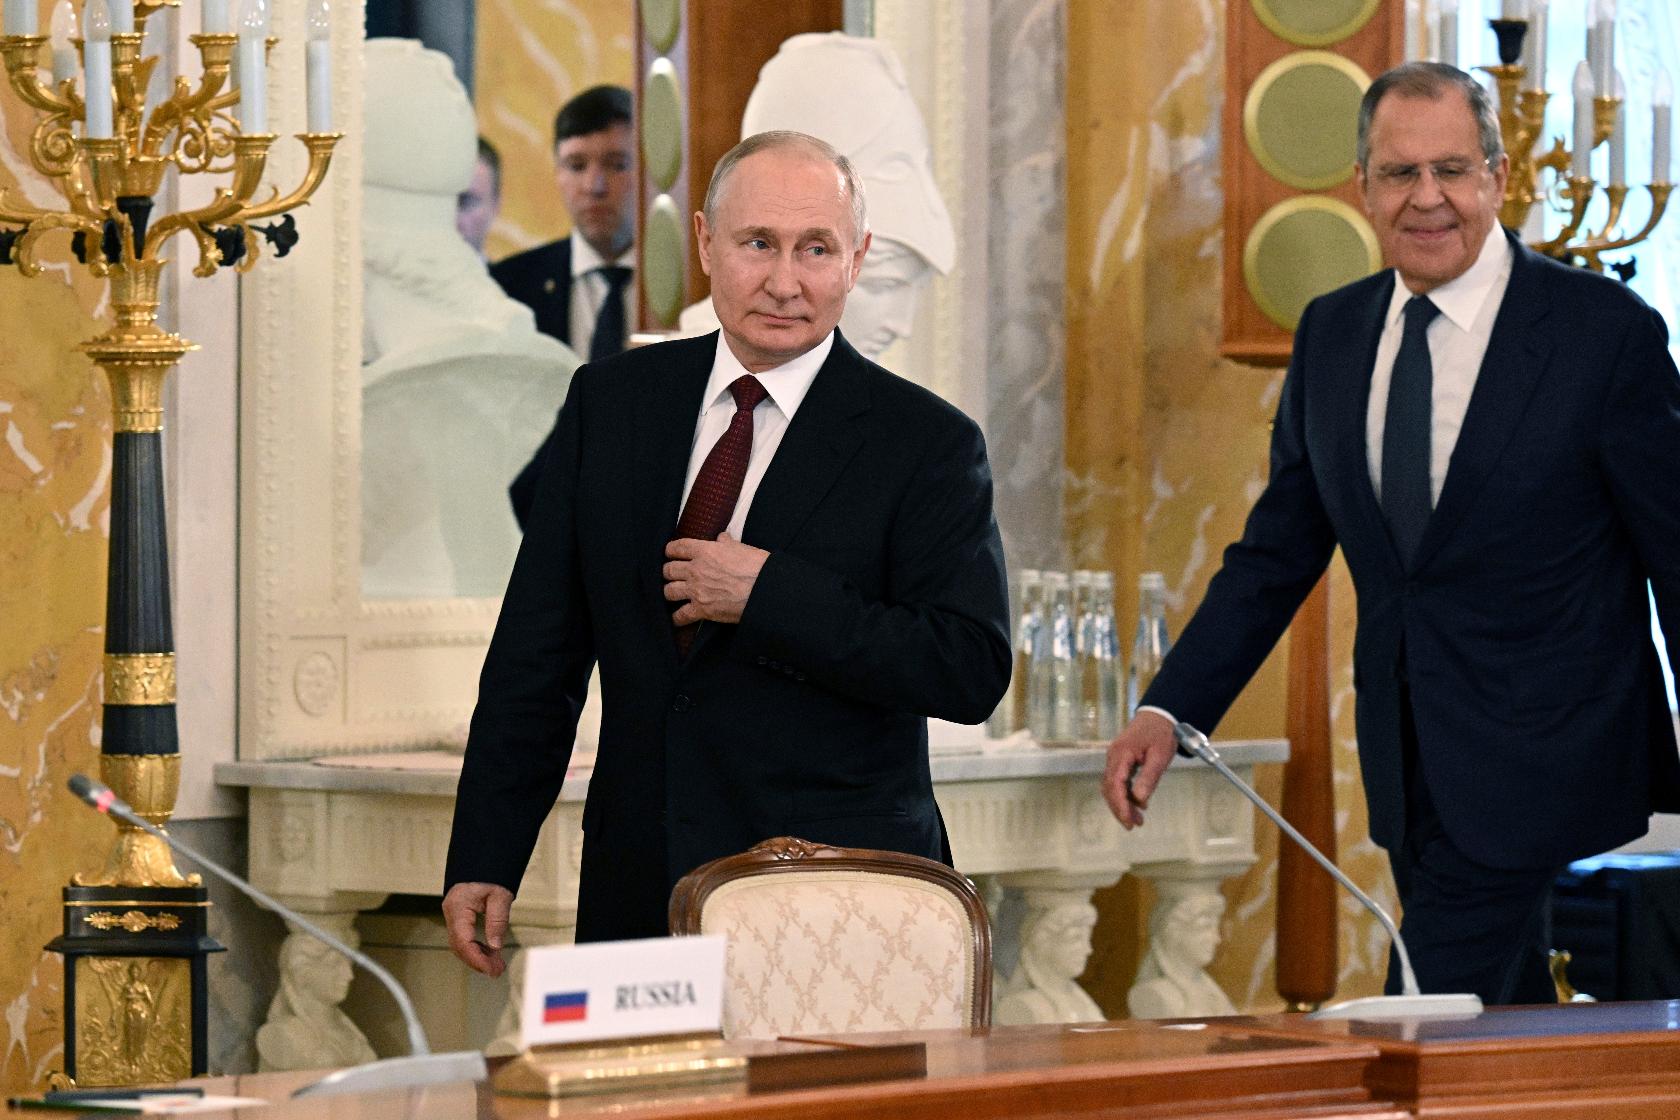 Putin Meets African Leaders with No Progress: What Does It Mean for World Peace? 20